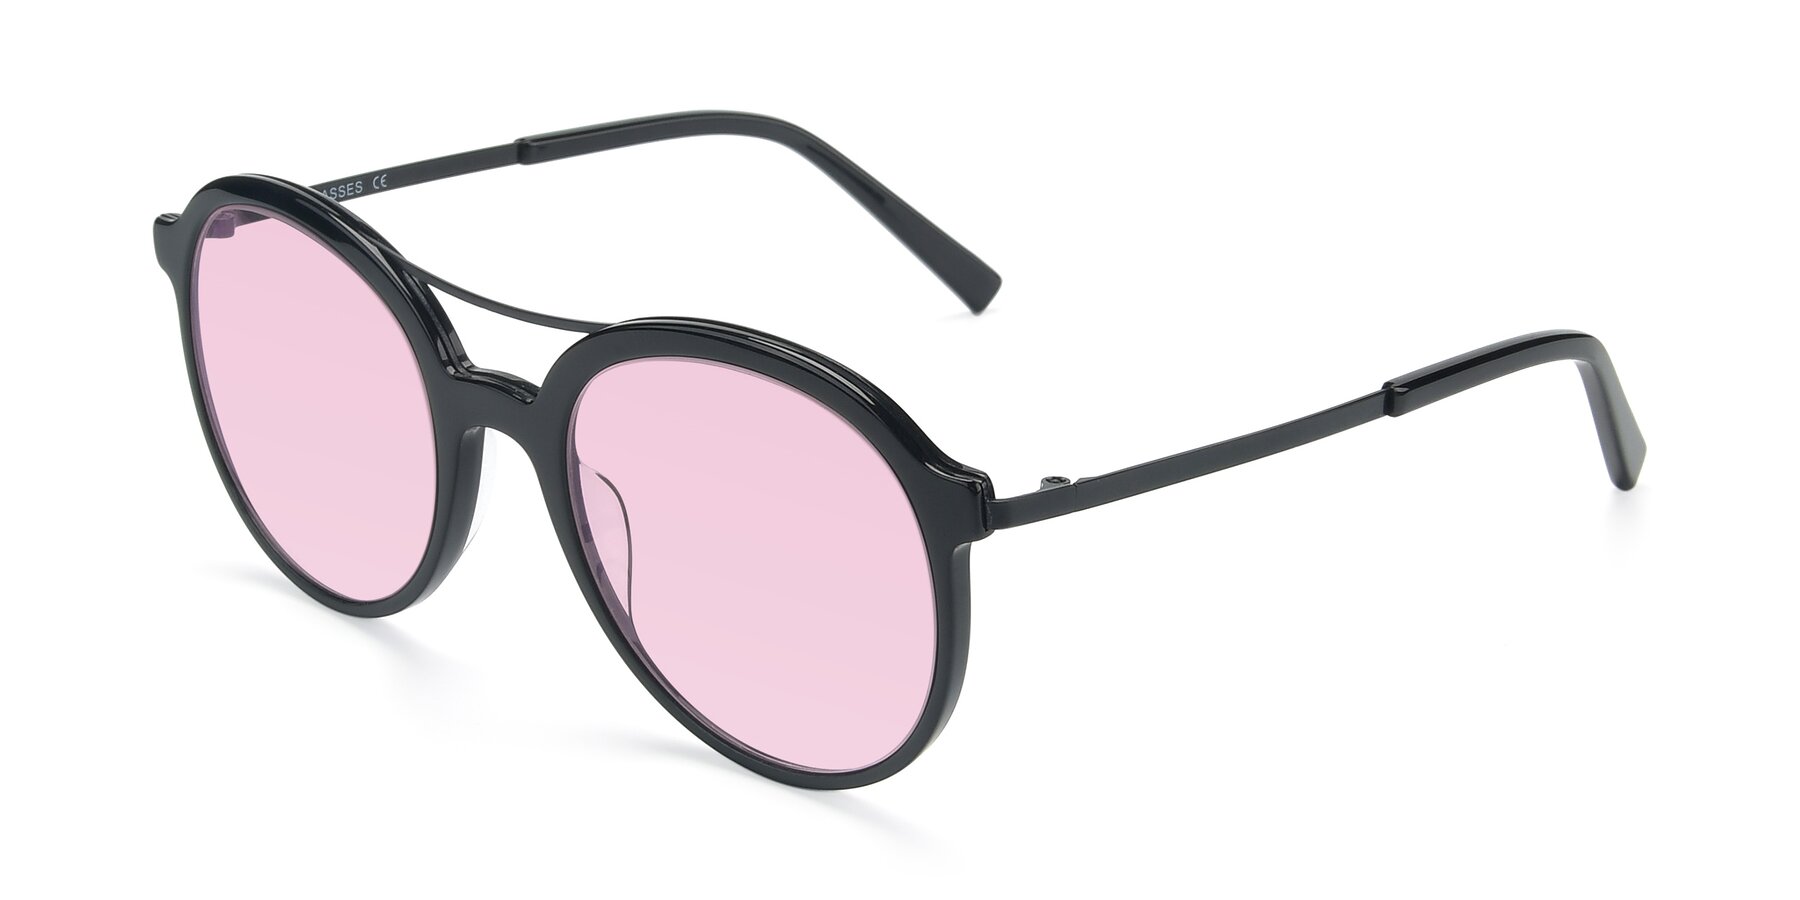 Angle of 17268 in Black with Light Pink Tinted Lenses